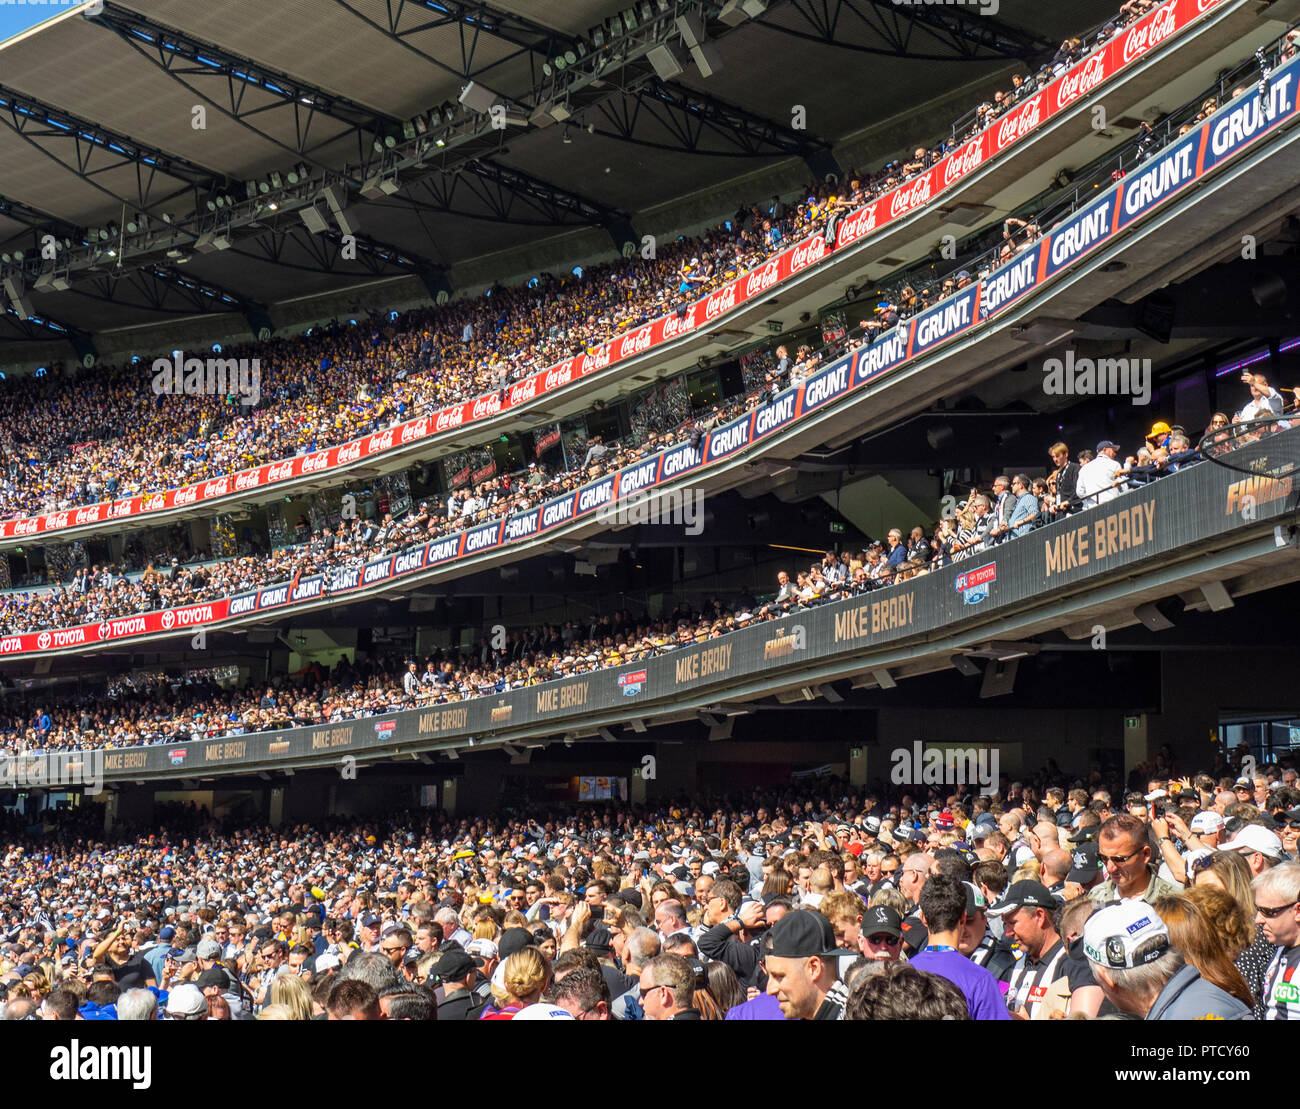 Fans and supporters of West Coast Eagles football club and Collingwood at 2018 AFL Grand Final at MCG Victoria Australia Stock Photo - Alamy